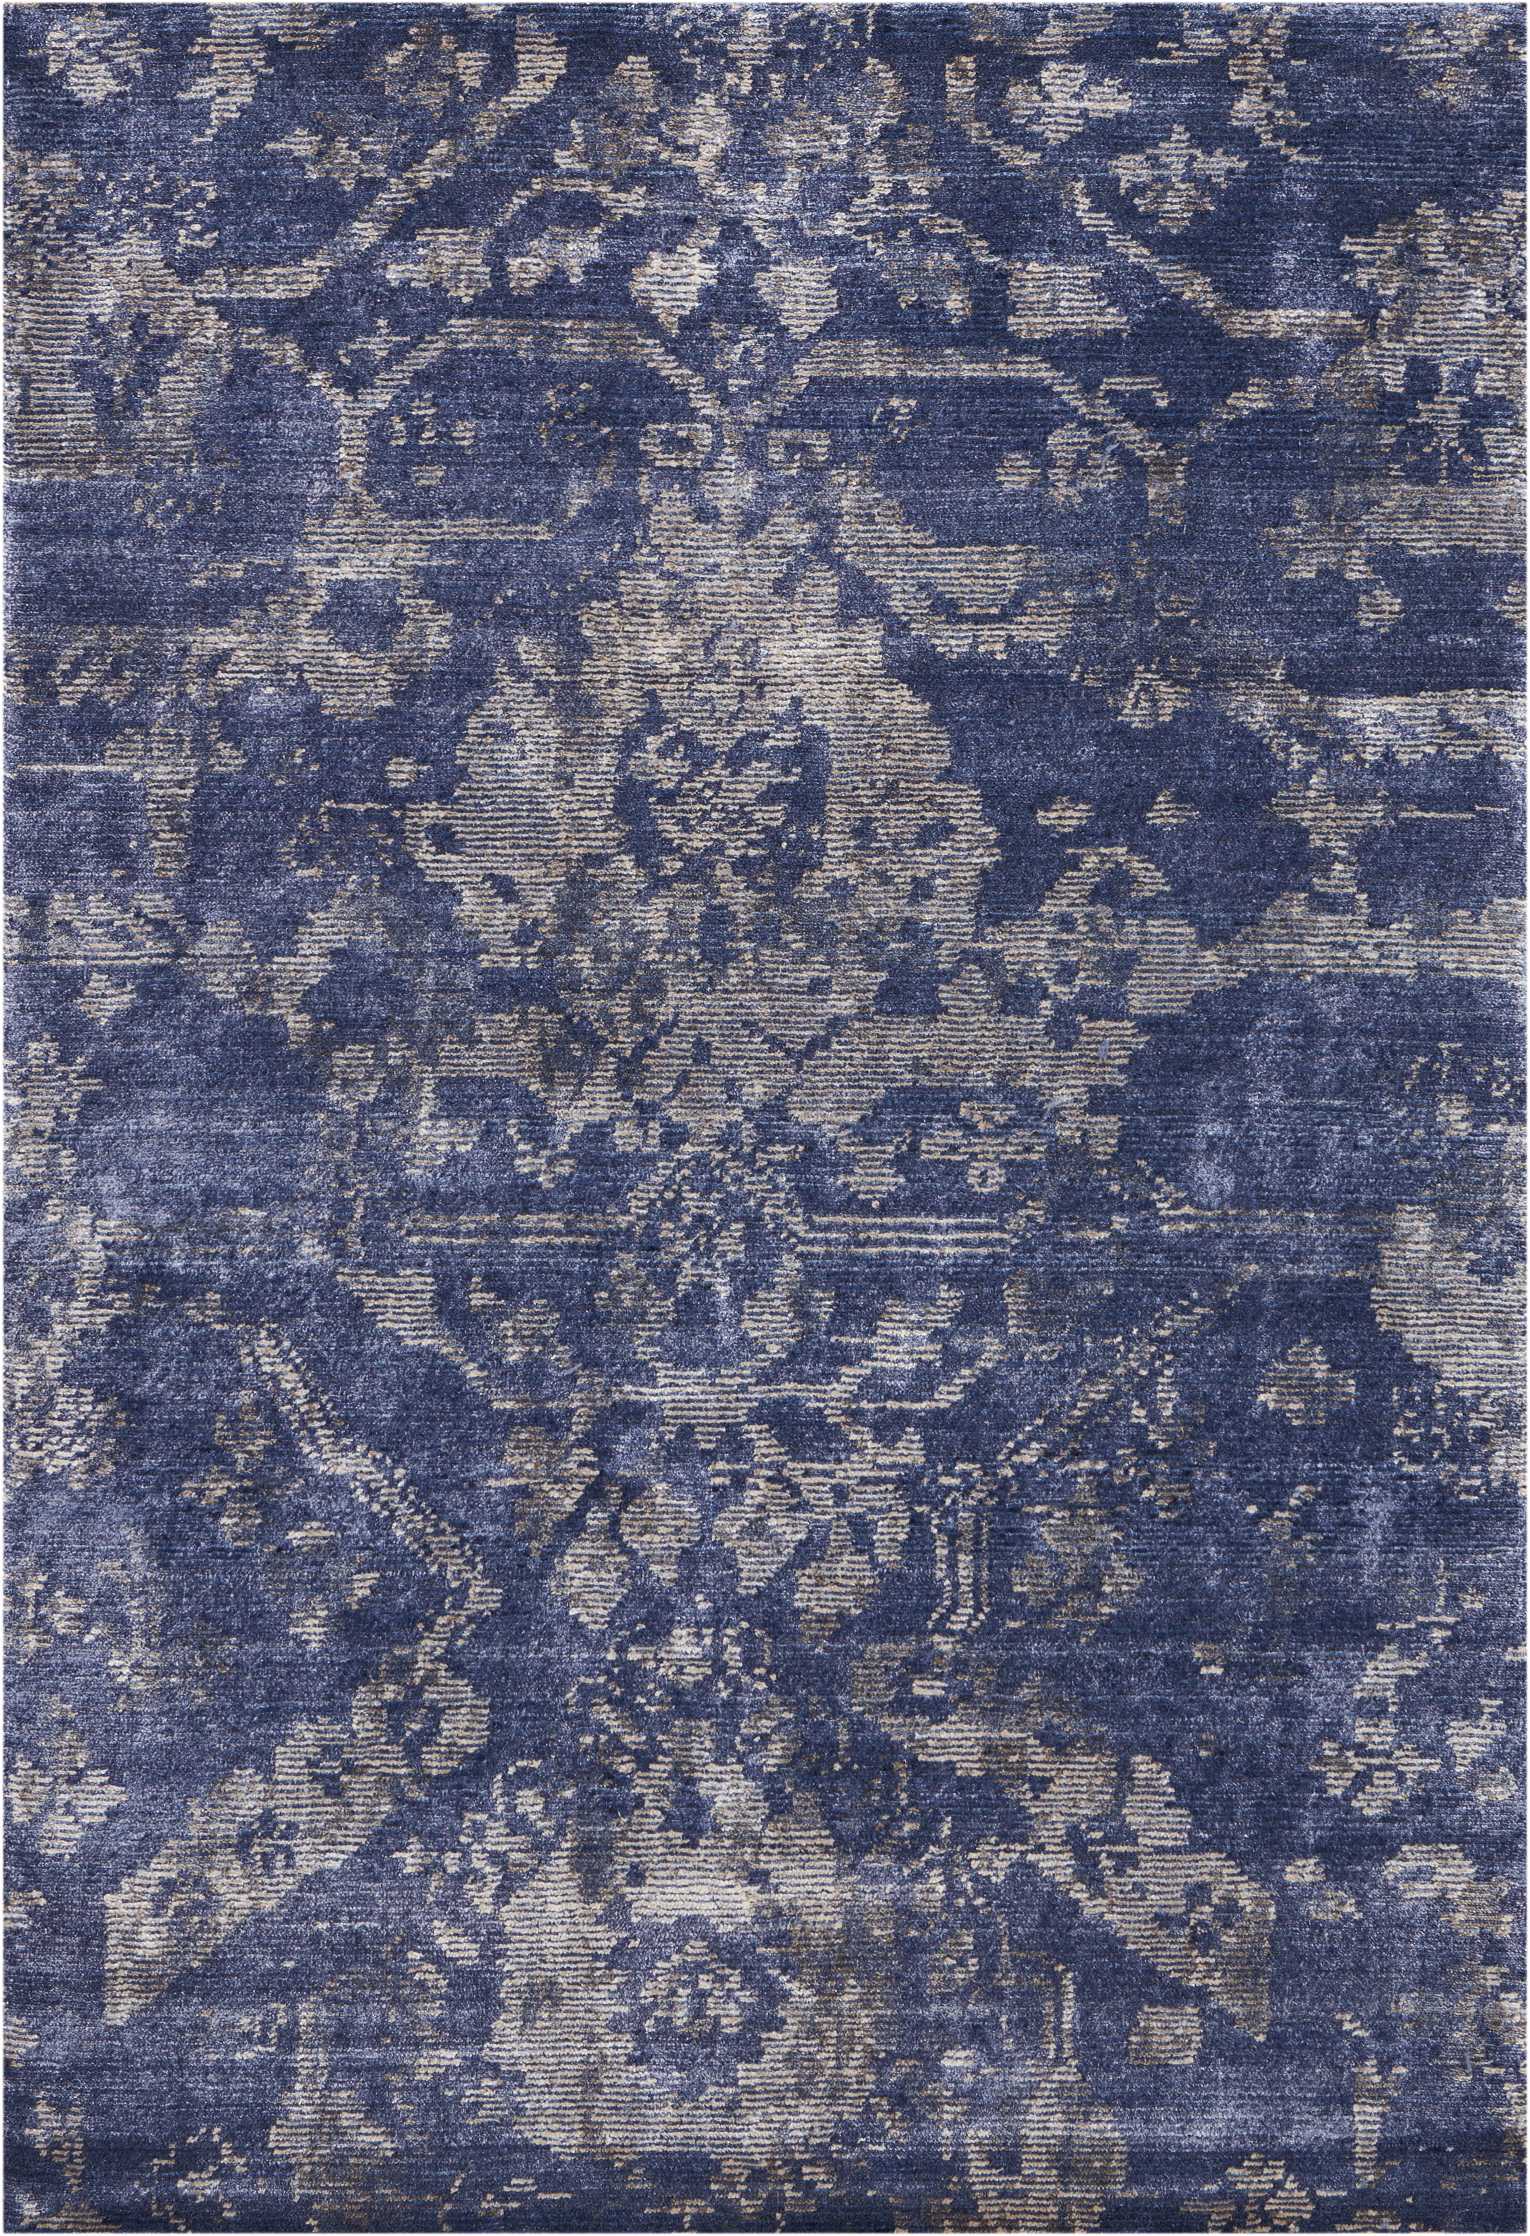 Distressed vintage rug with traditional motifs in shades of blue.